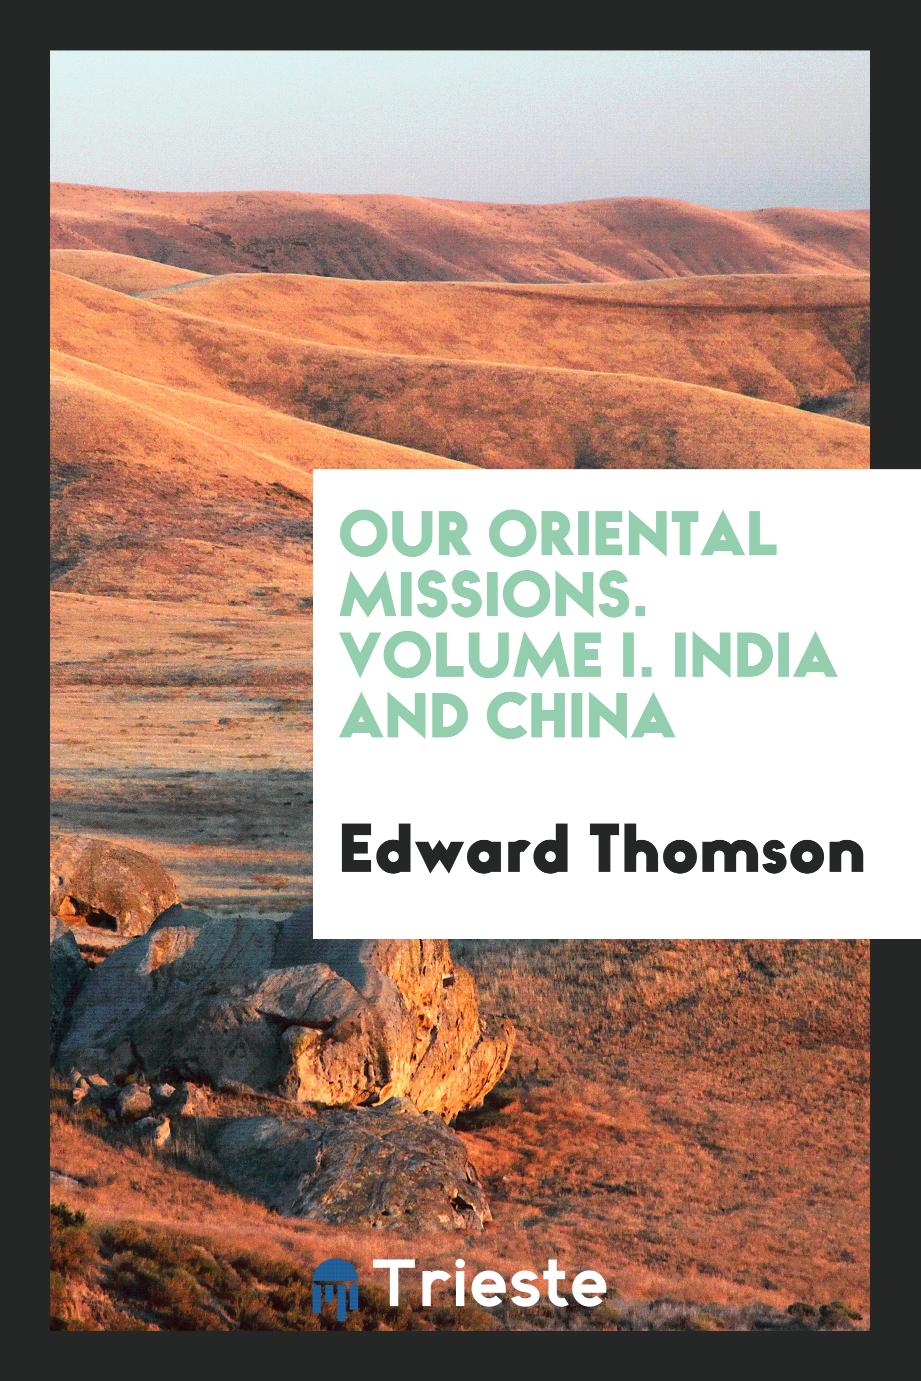 Our oriental missions. Volume I. India and China